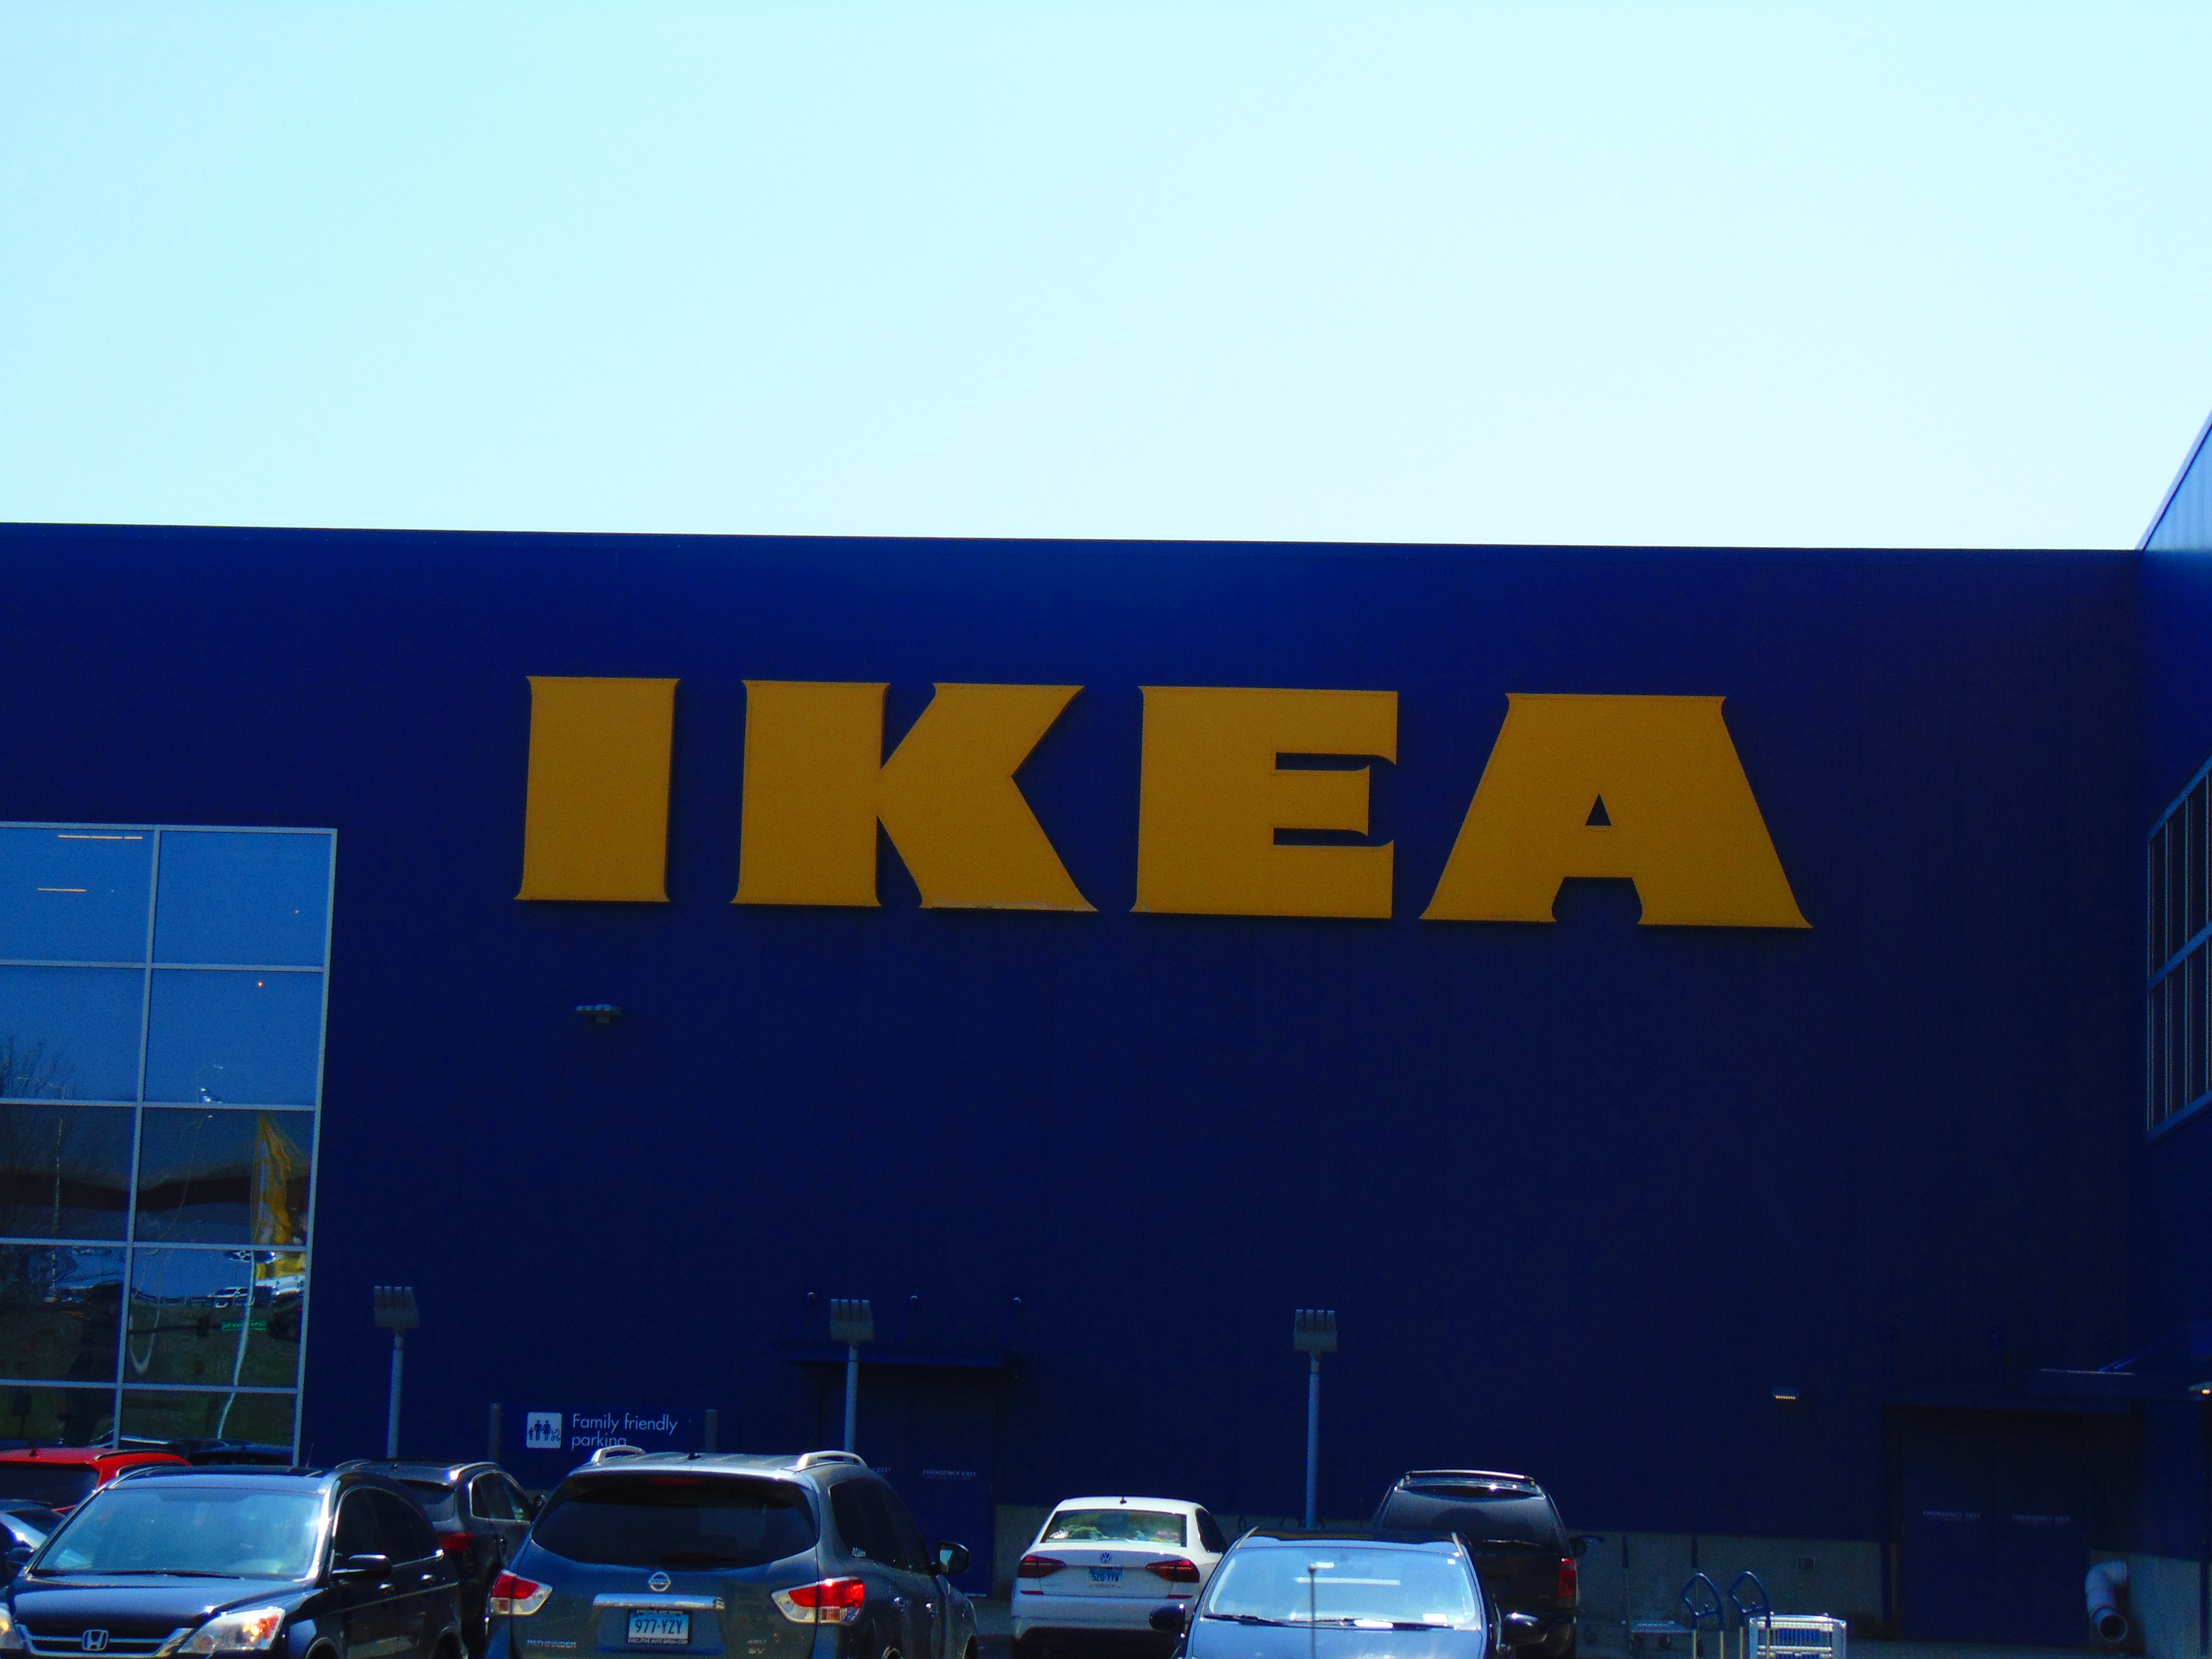 A photo shows a large Ikea building with cars parked beside it.